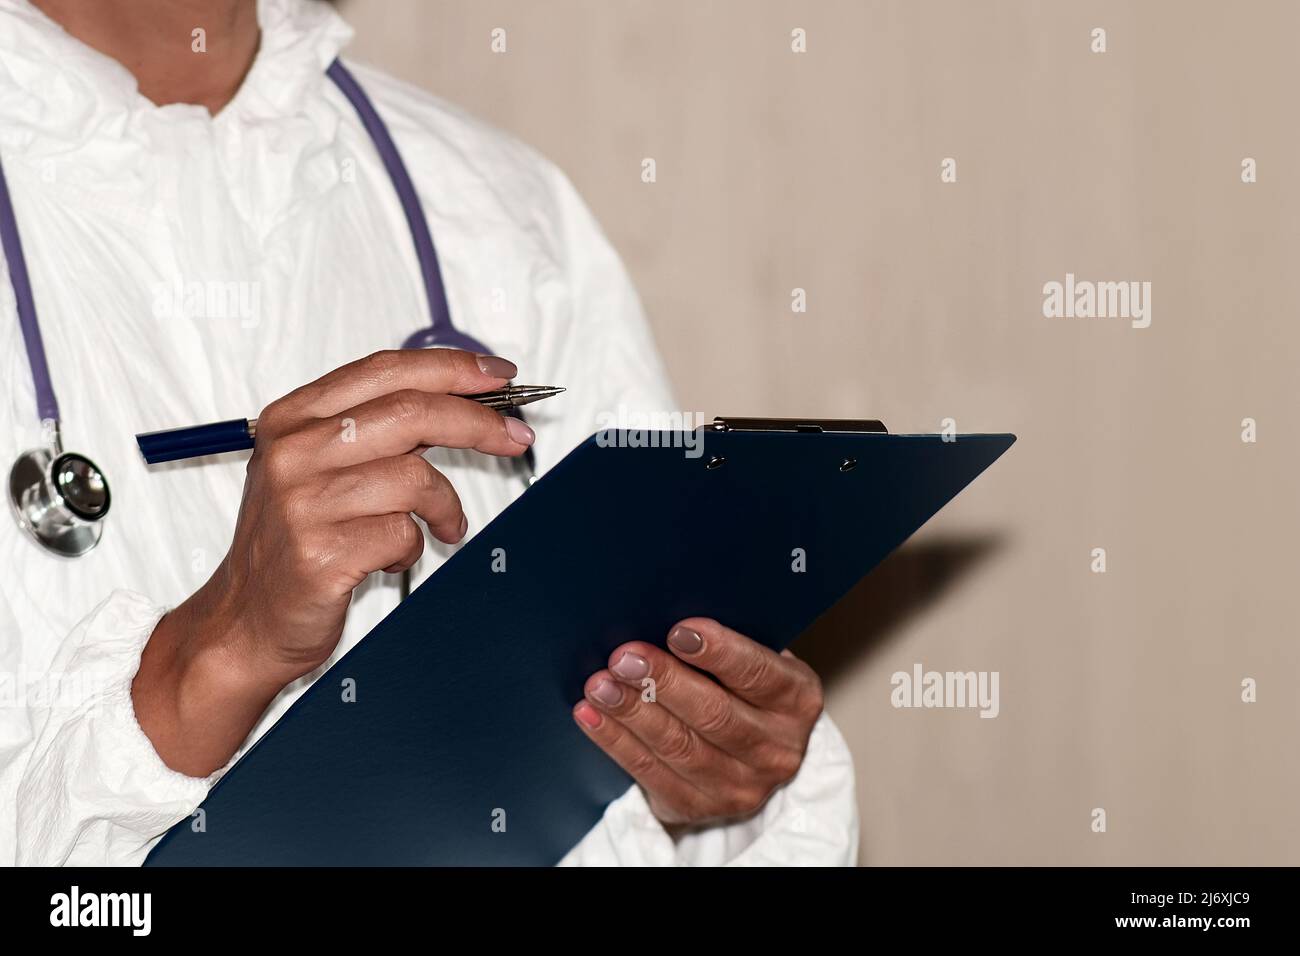 Close-up of a doctor holding a tablet with a questionnaire. The stethoscope is prepared for examination of the patient Stock Photo